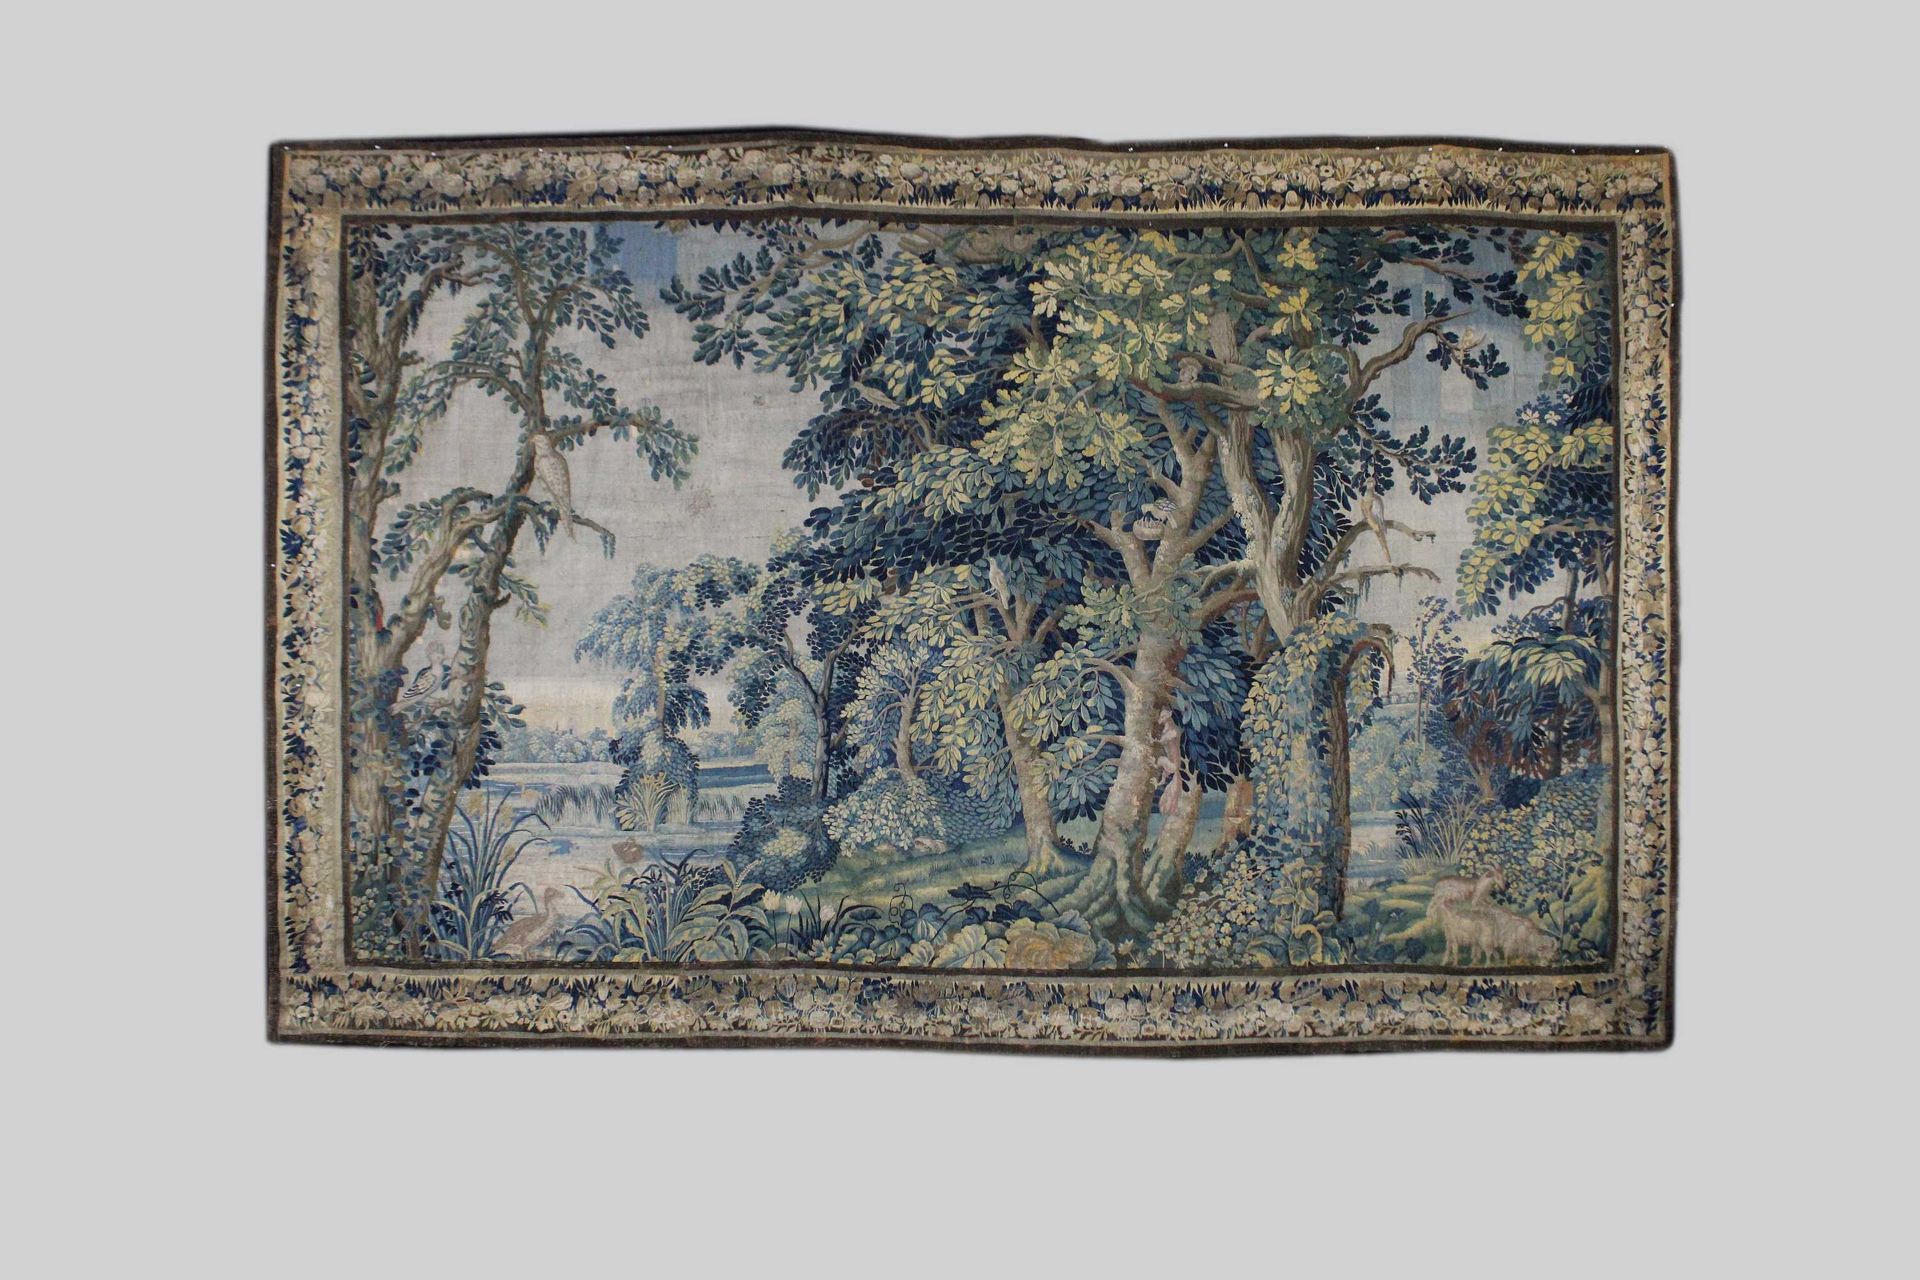 Tapisserie, Brüssel, 16.-17. Jh. Tapestry, Brussels, 16th-17th c. Forest scene w&hellip;